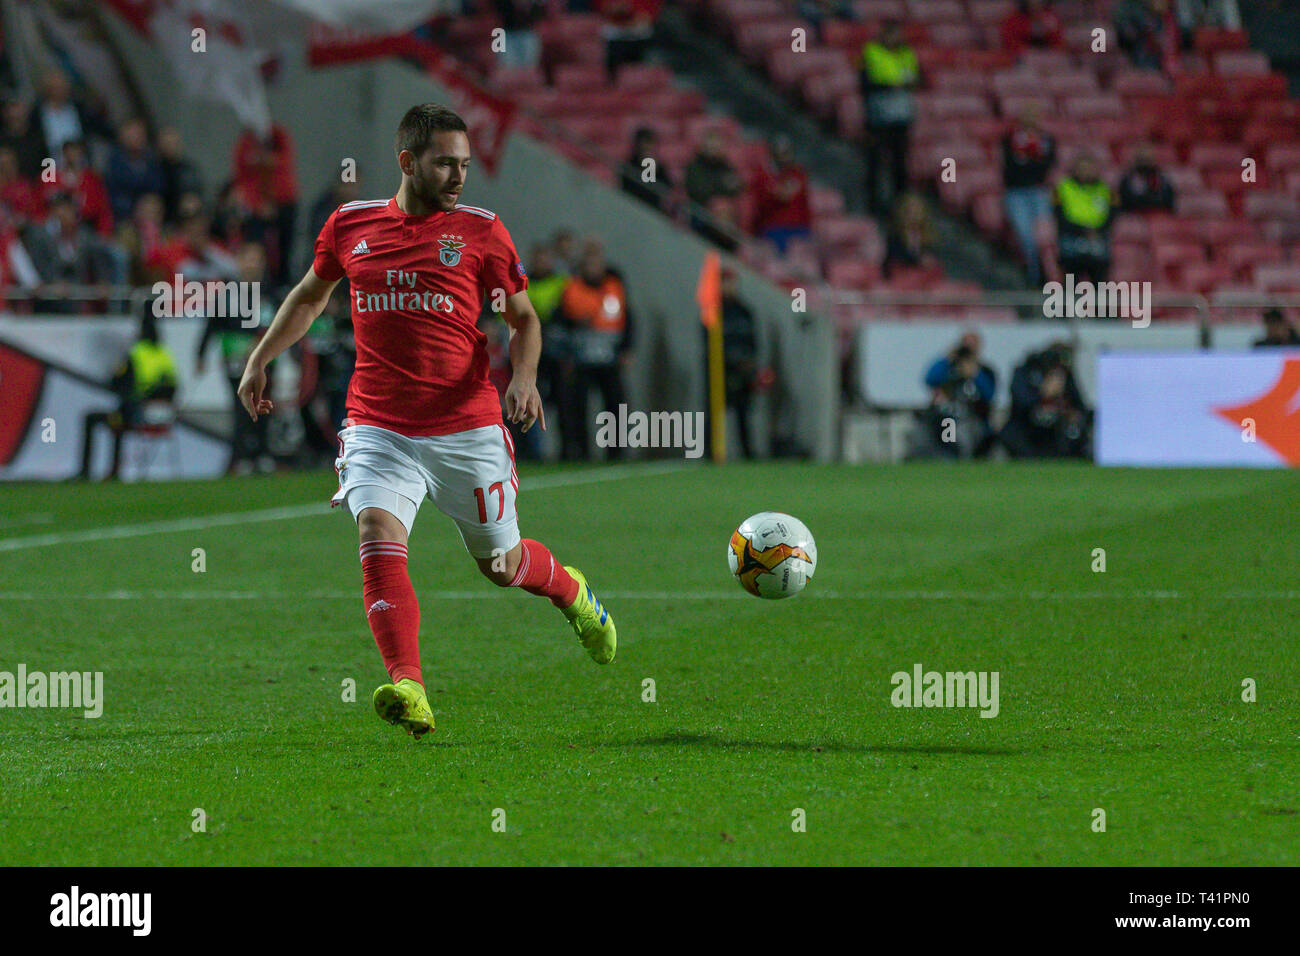 April 11, 2019. Lisbon, Portugal. Benfica's forward from Serbia Andrija Zivkovic (17) in action during the game of the UEFA Europa League, Quarter Finals, SL Benfica vs Eintracht Frankfurt © Alexandre de Sousa/Alamy Live News Stock Photo